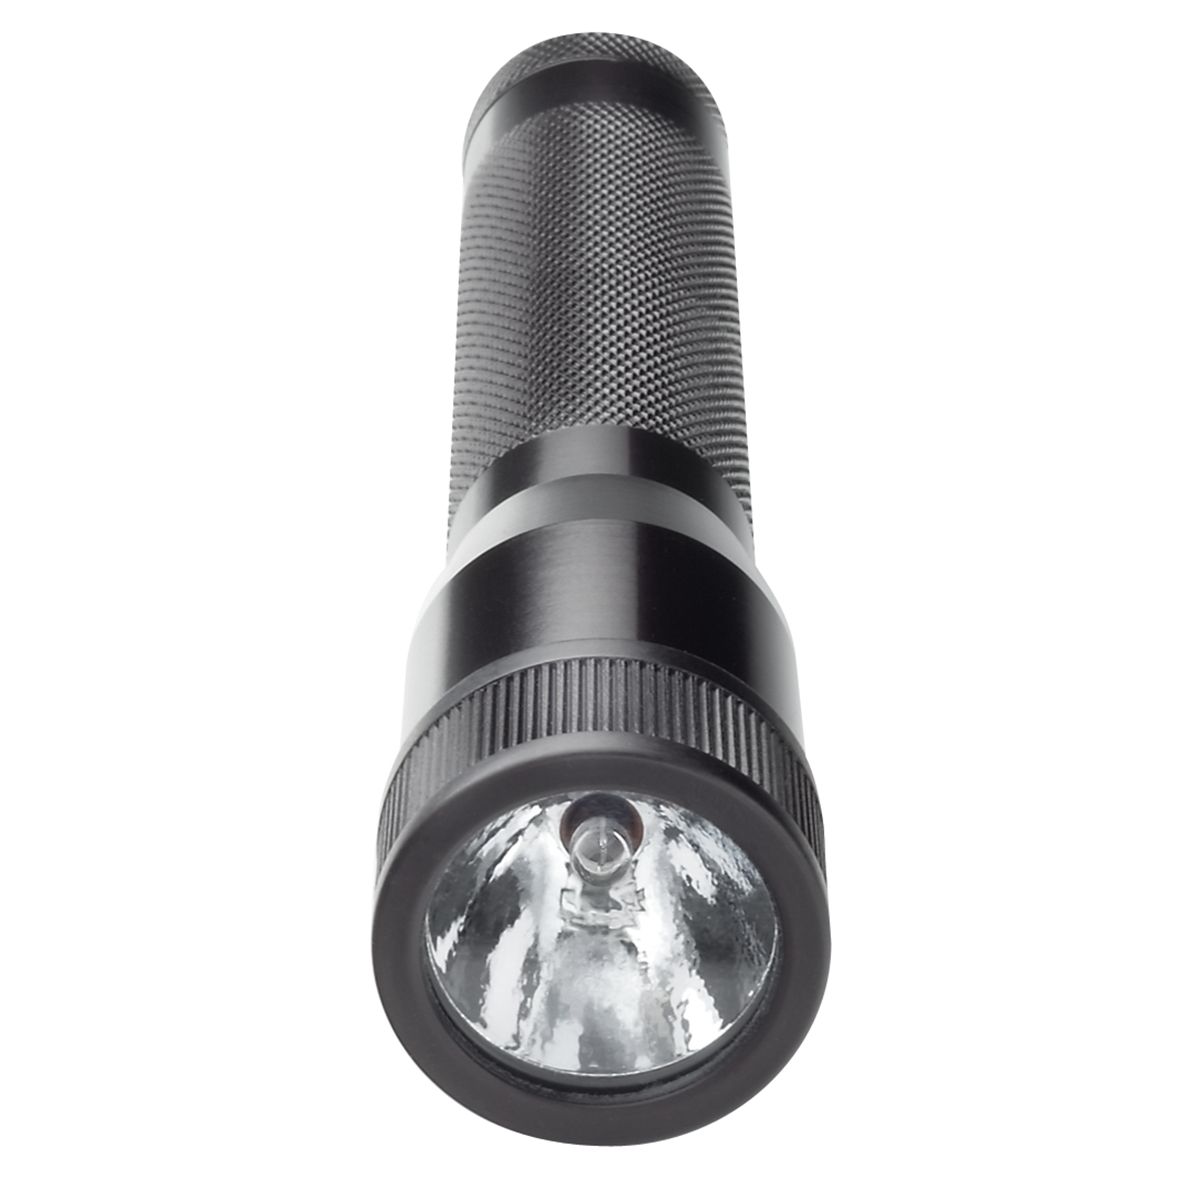 Strion Rechargeable Flashlight (Light Only)